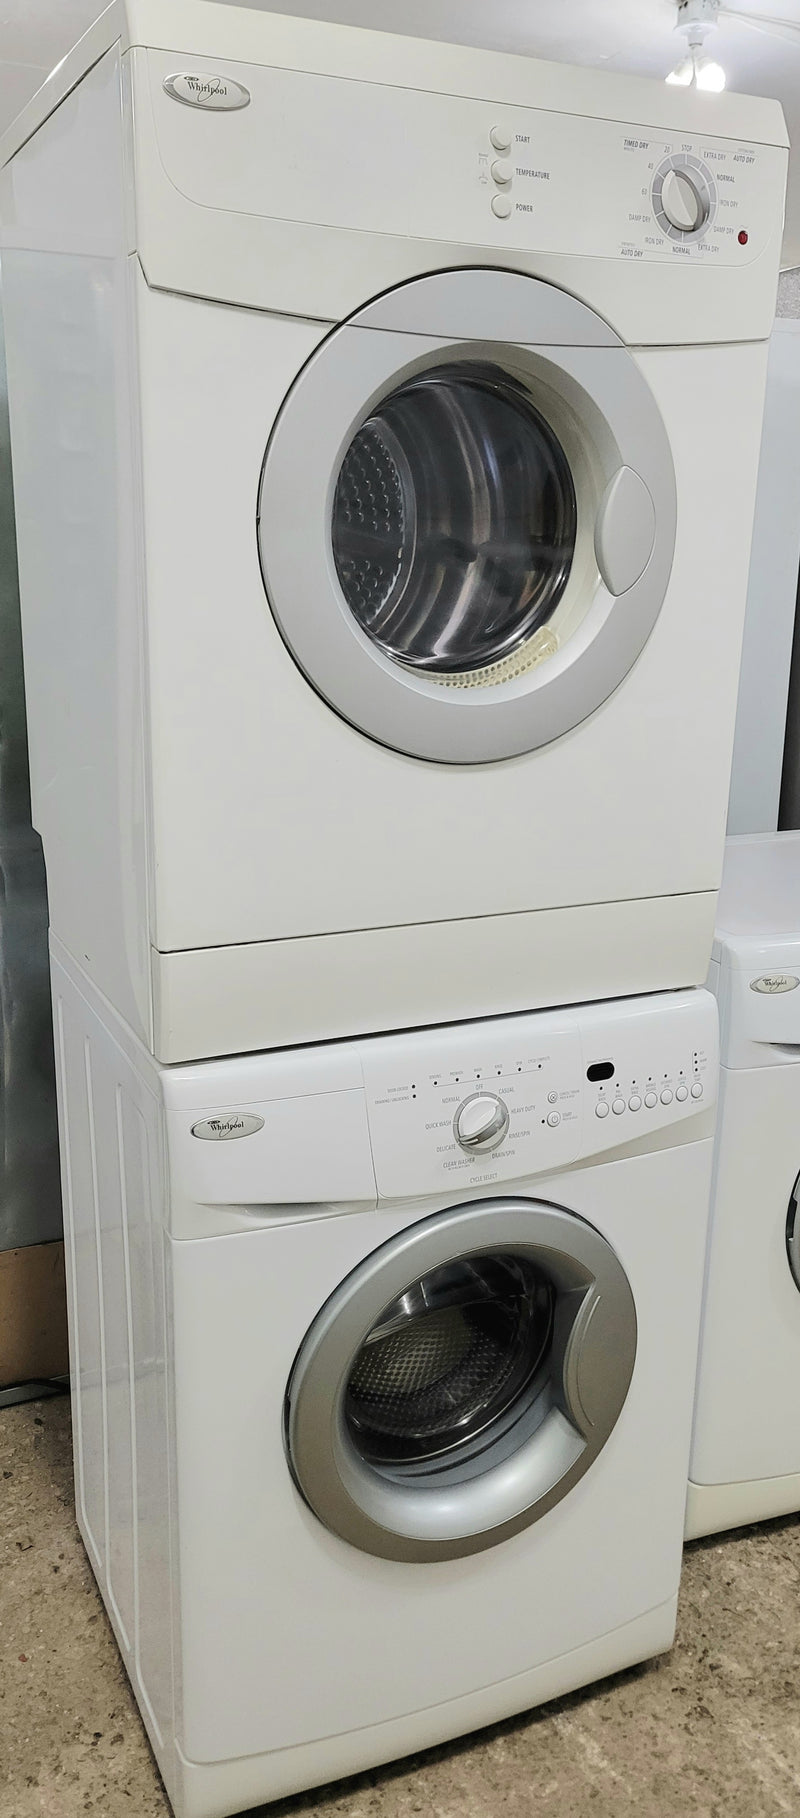 Whirlpool 24" Wide White Apartment Size Matching Front Load Washer and Dryer Set, Free 60 Day Warranty